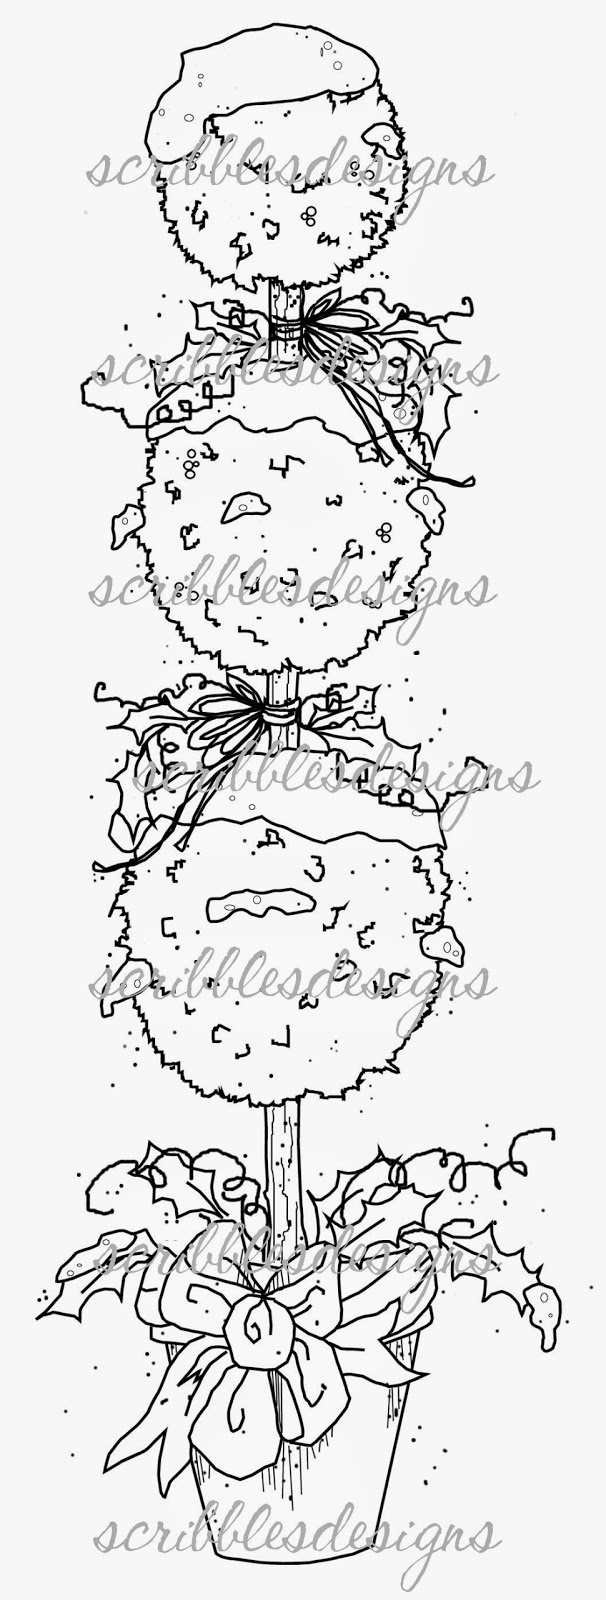 http://buyscribblesdesigns.blogspot.ca/2012/10/801-snow-capped-topiary-300.html